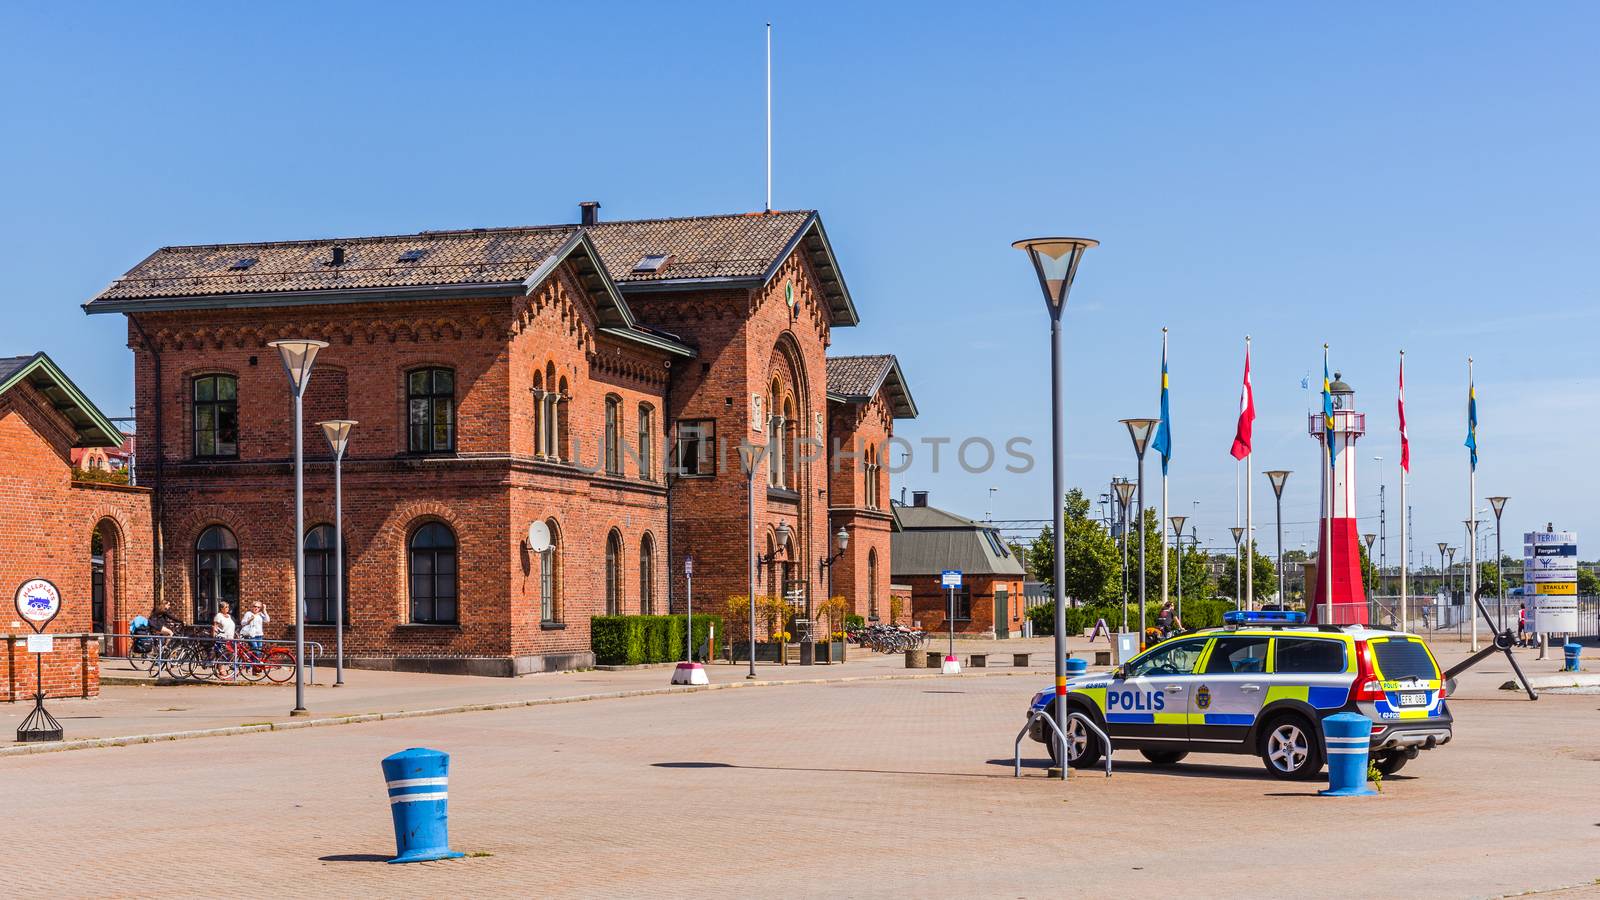 Railway station in Ystad partially used as a hotel. In the well-known series based on Henning Mankell's novels about inspector Wallander, building served as a police station.